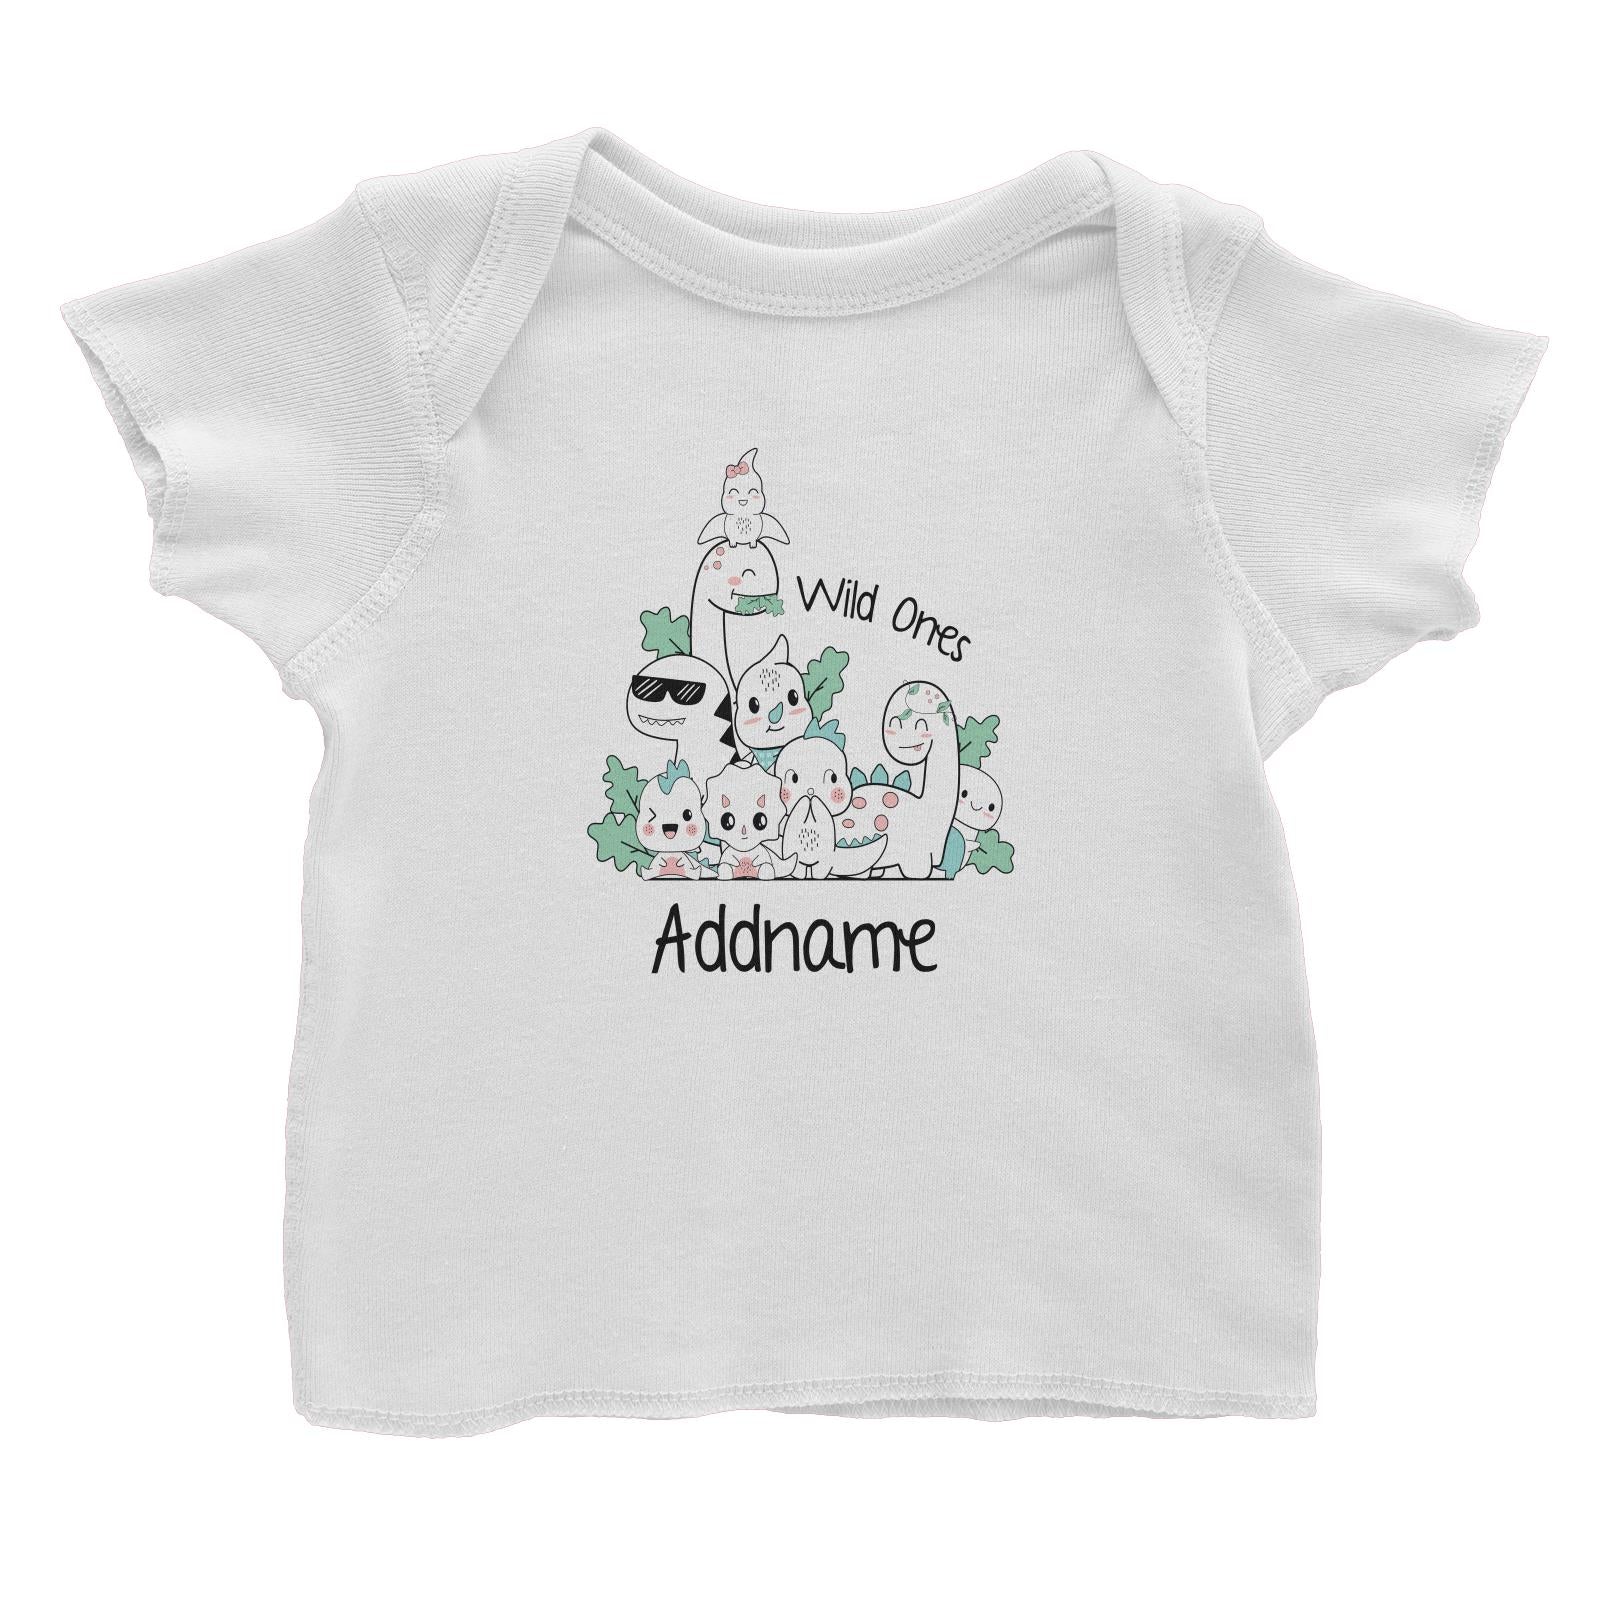 Cute Animals And Friends Series Cute Little Dinosaur Wild Ones Addname Baby T-Shirt